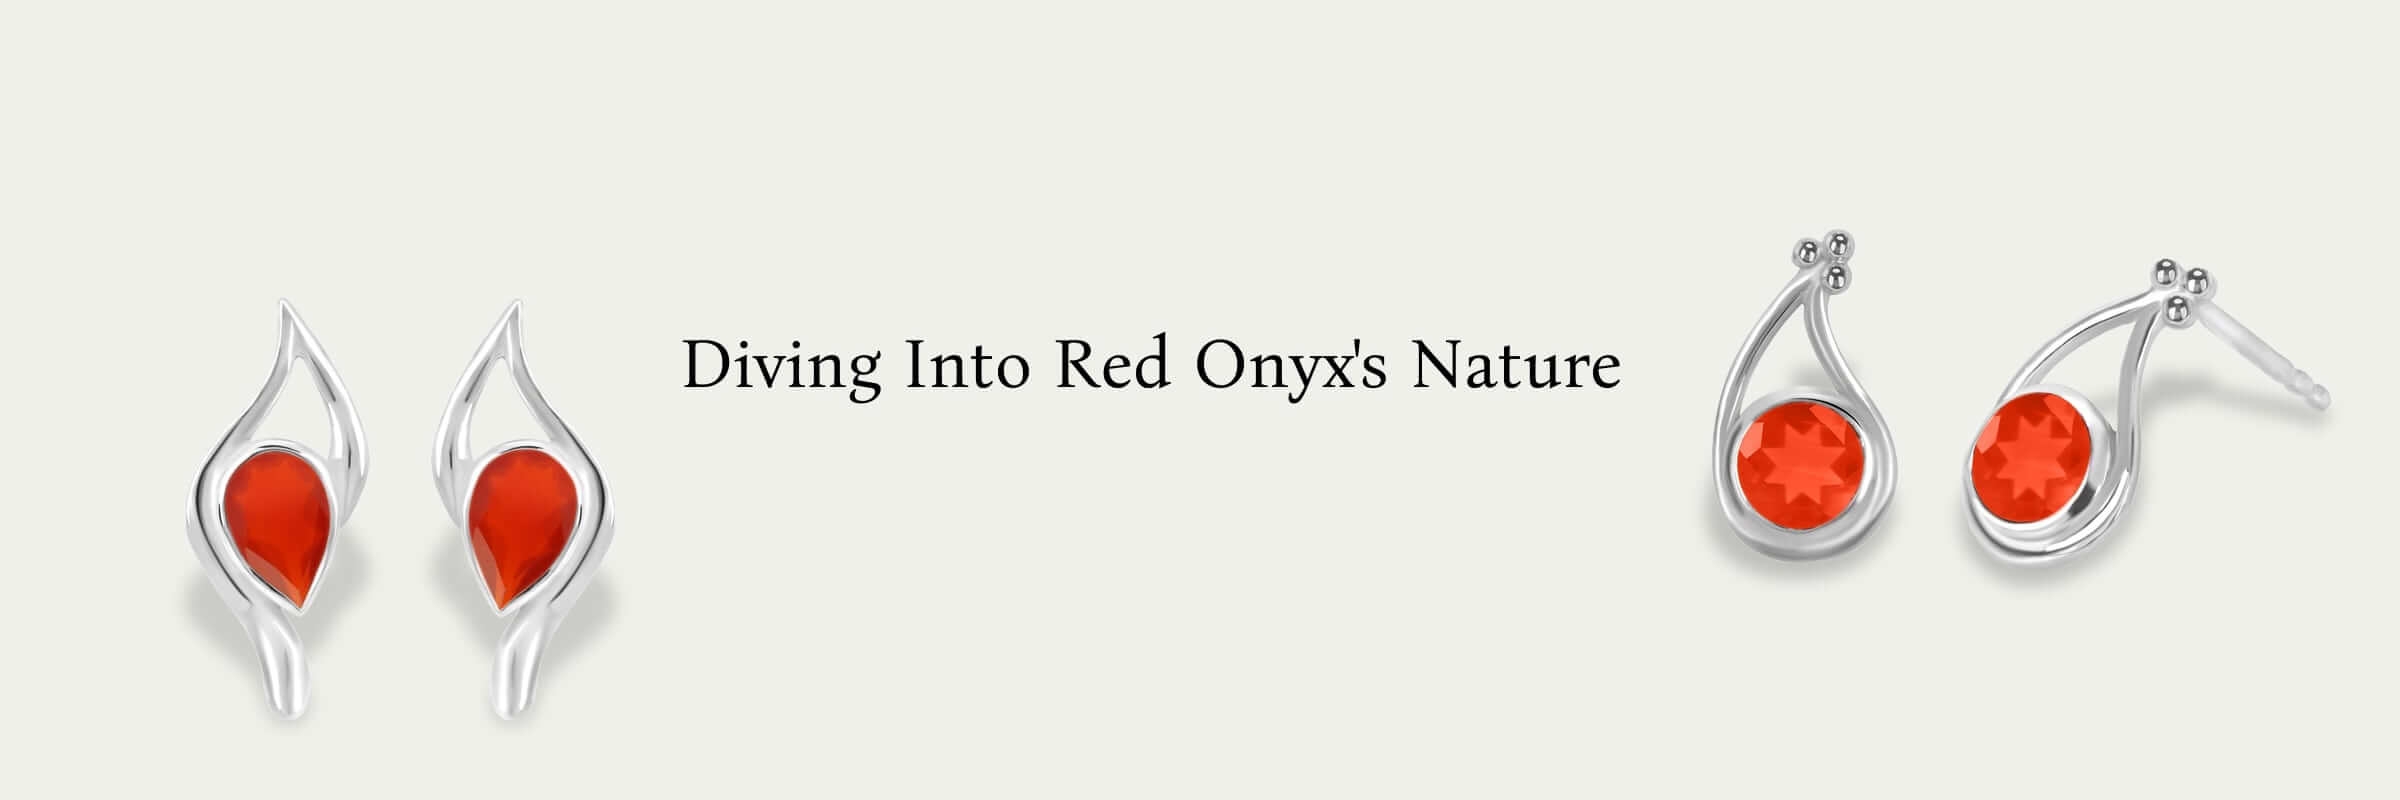 Physical Properties of Red Onyx Gemstone